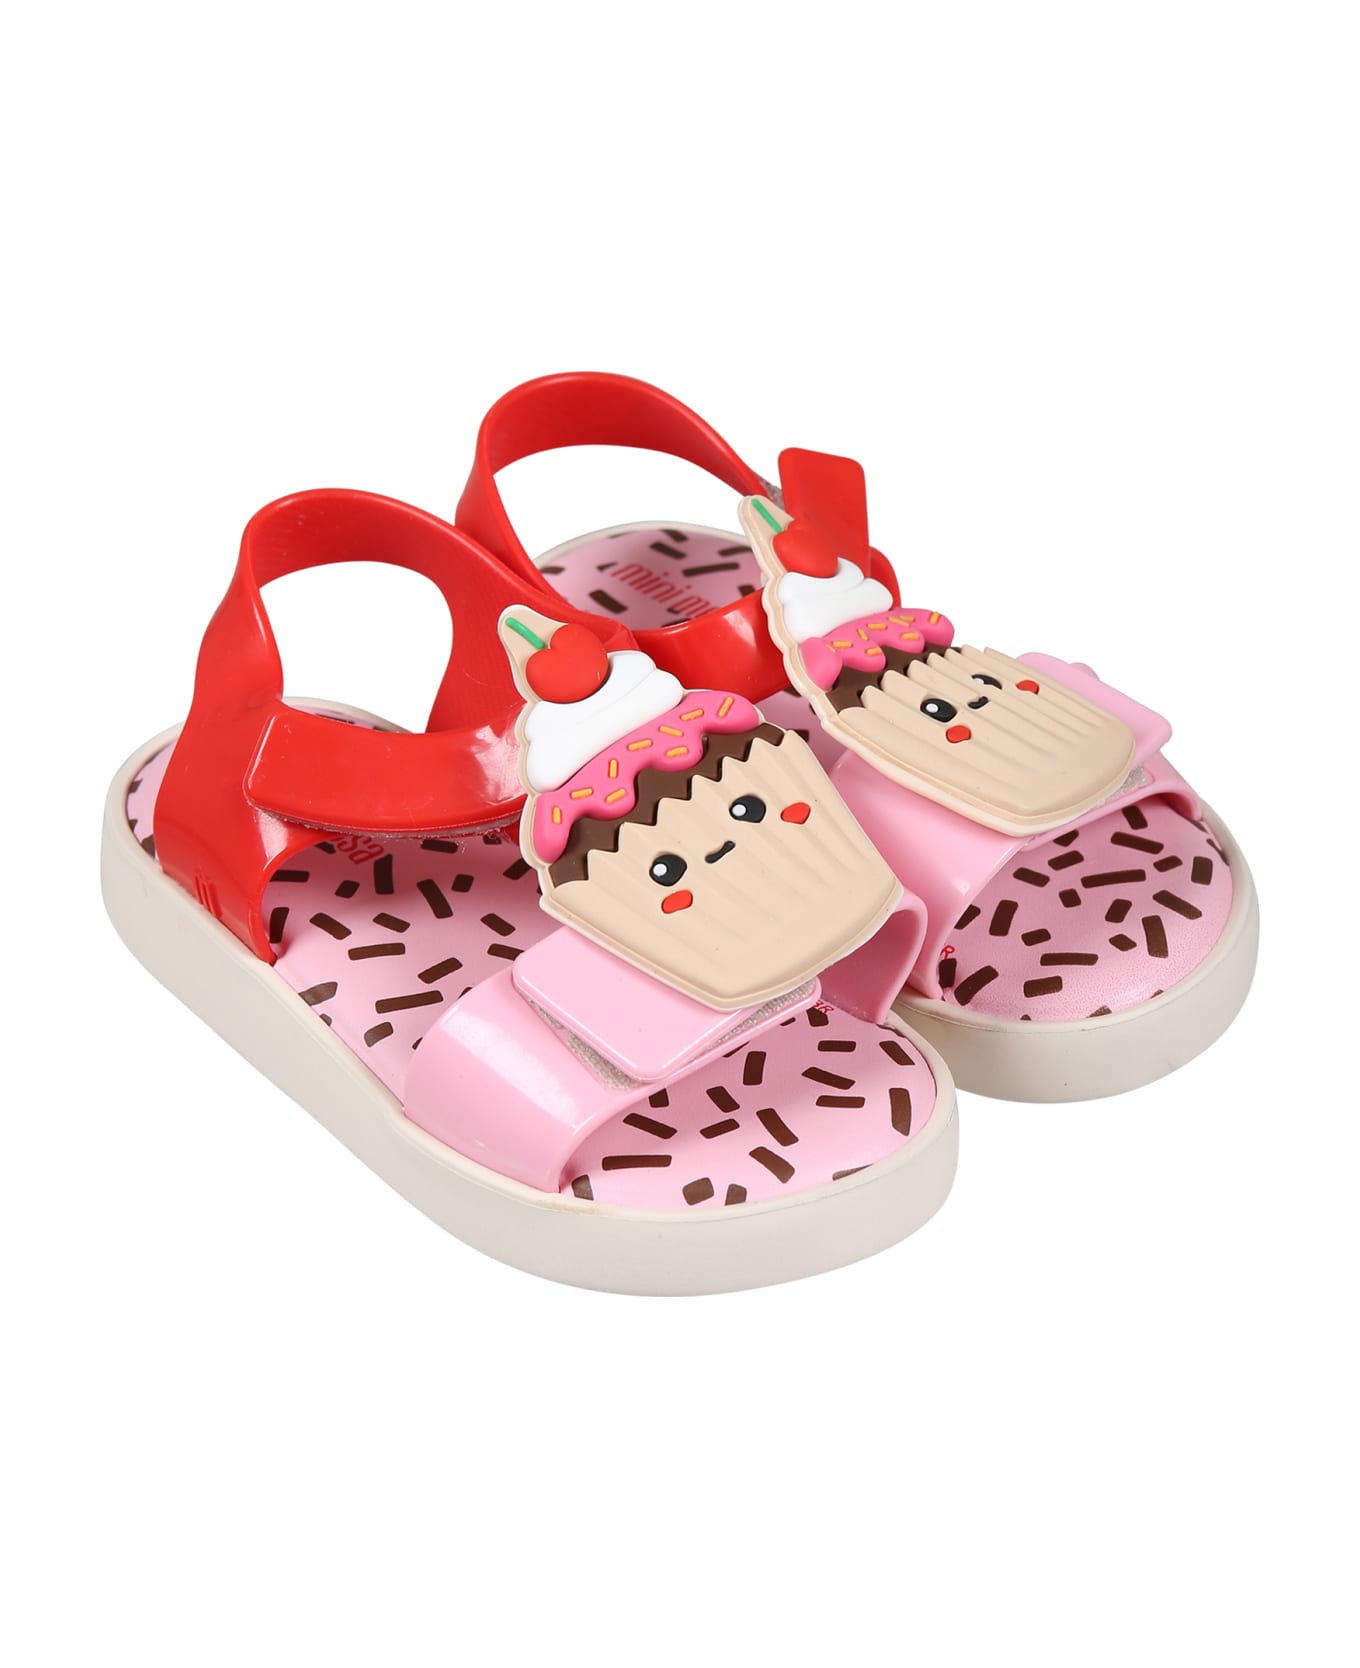 Melissa Multicolor Sandals For Girl With Cupcake And Logo - Multicolor